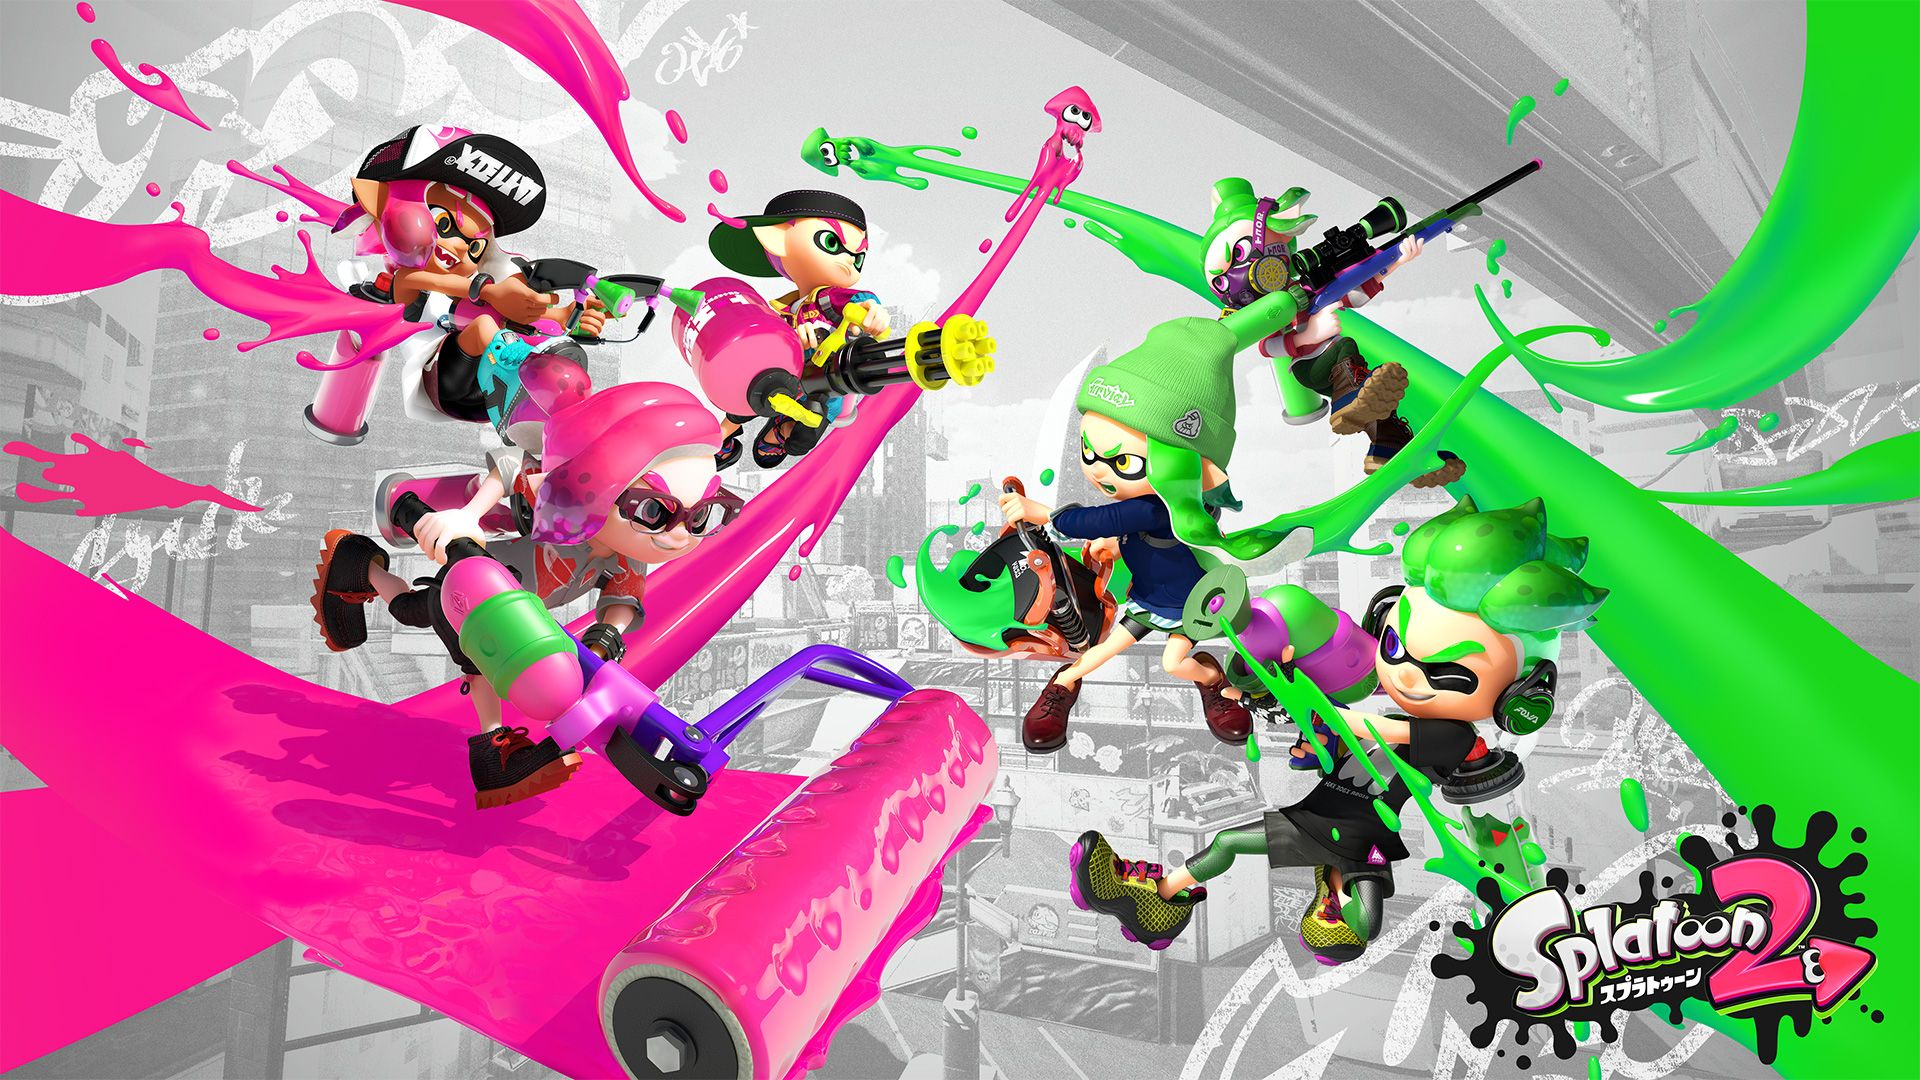 1920x1080 Nintendo has released Splatoon 2 themed wallpapers for Mobile and Desktop view. Download them here. | Splatoon, Wallpaper, Character wallpaper